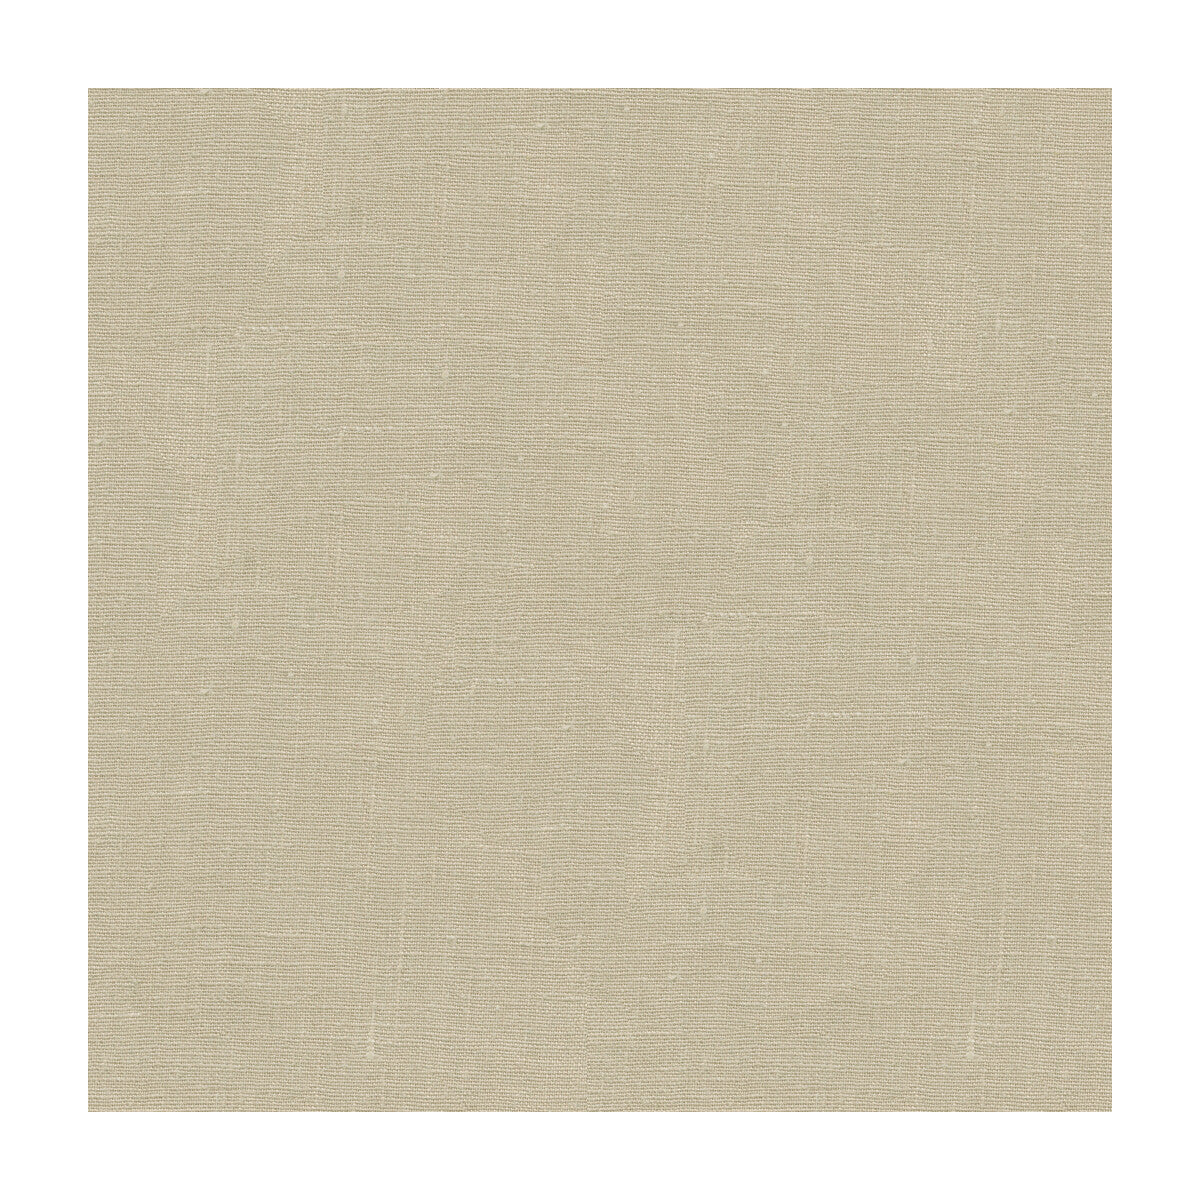 Dublin fabric in biscuit color - pattern 32344.716.0 - by Kravet Basics